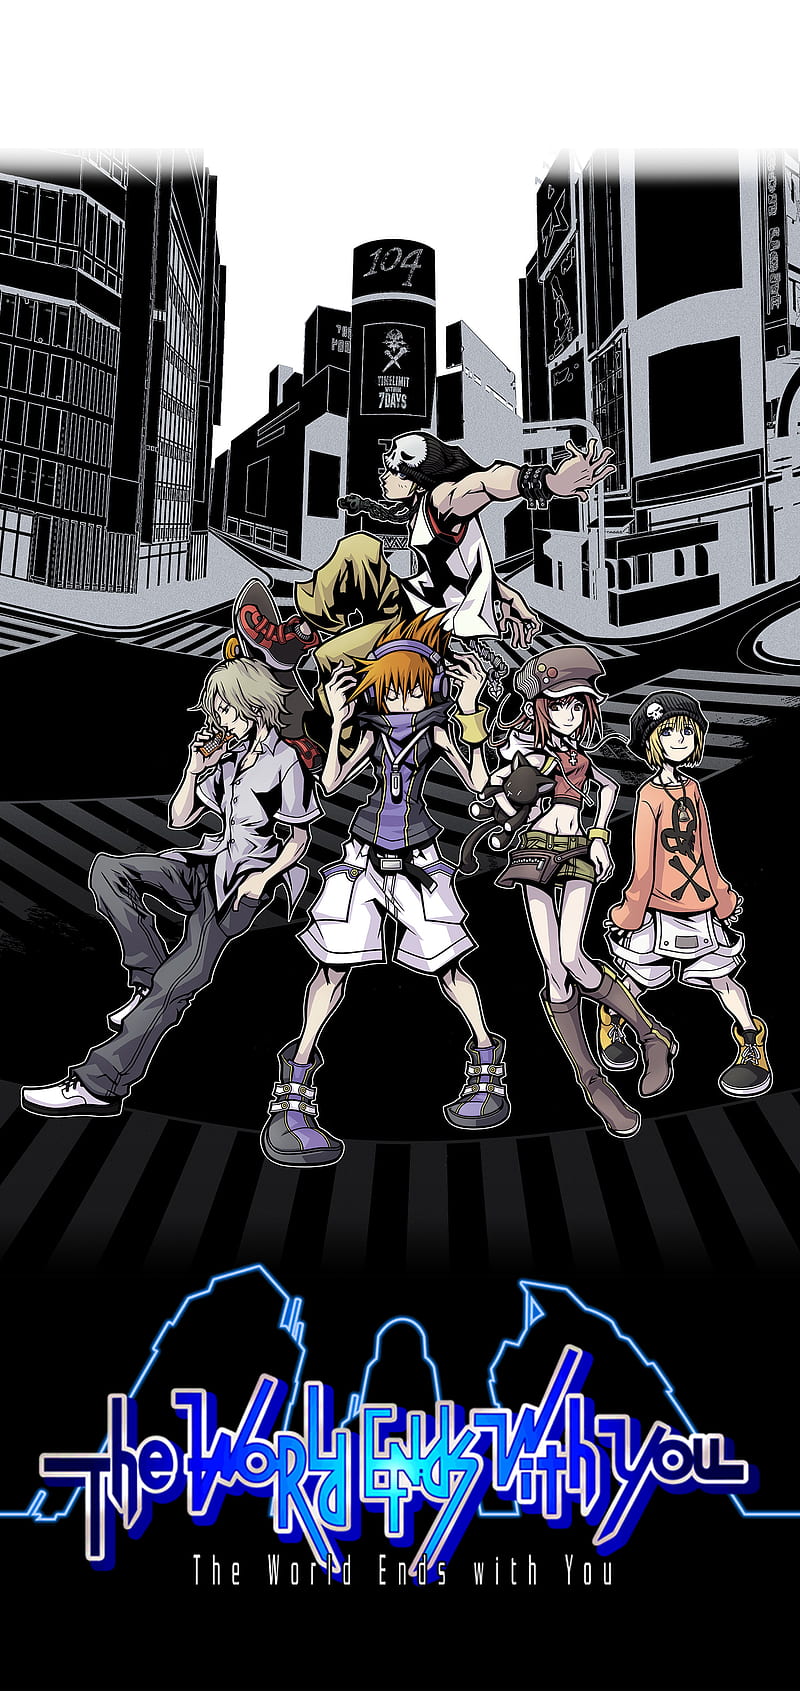 world ends with you, anime, video games, HD phone wallpaper